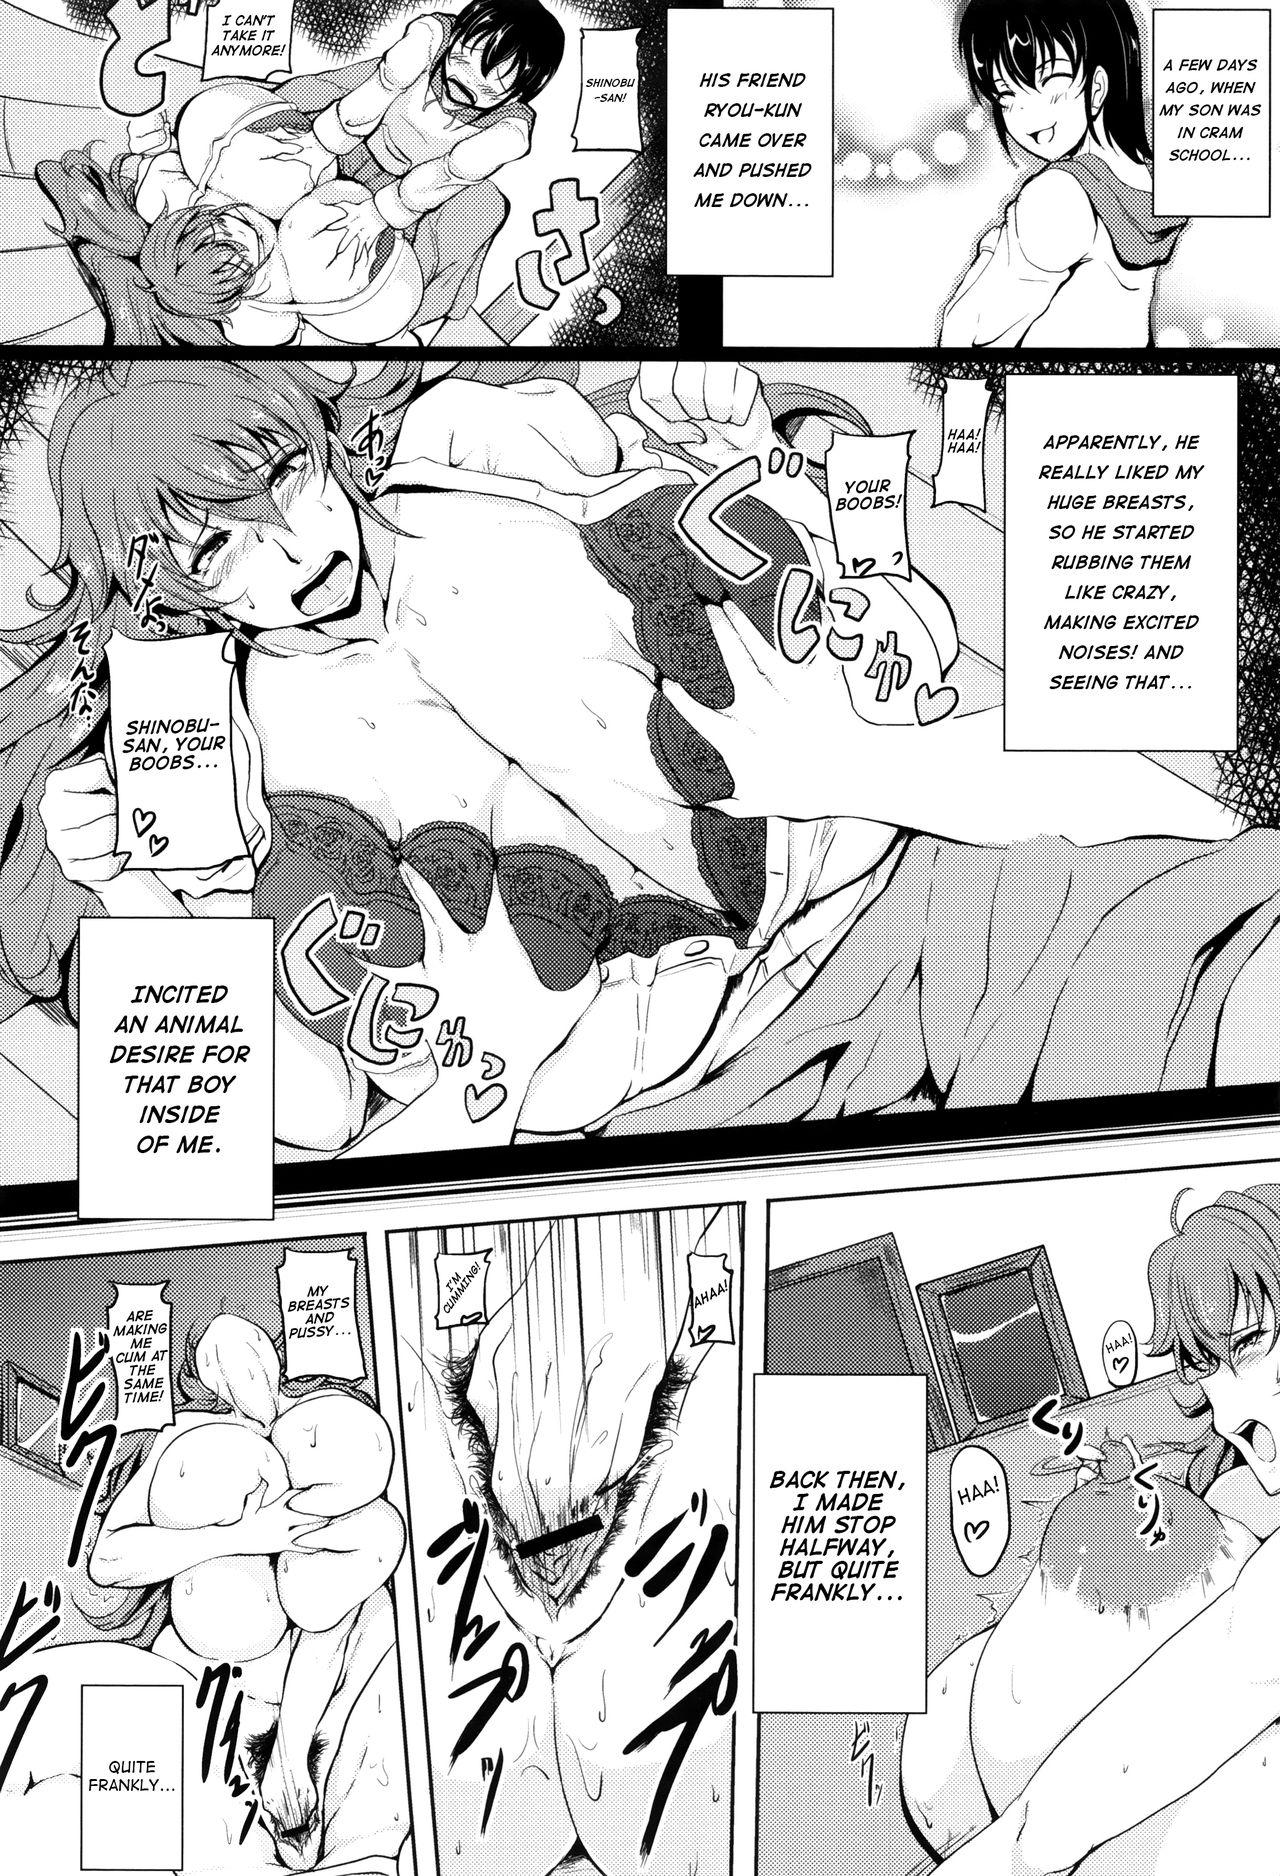 Perra Ikenai Tomohaha | Dirty Mother of a Friend Masterbate - Page 2